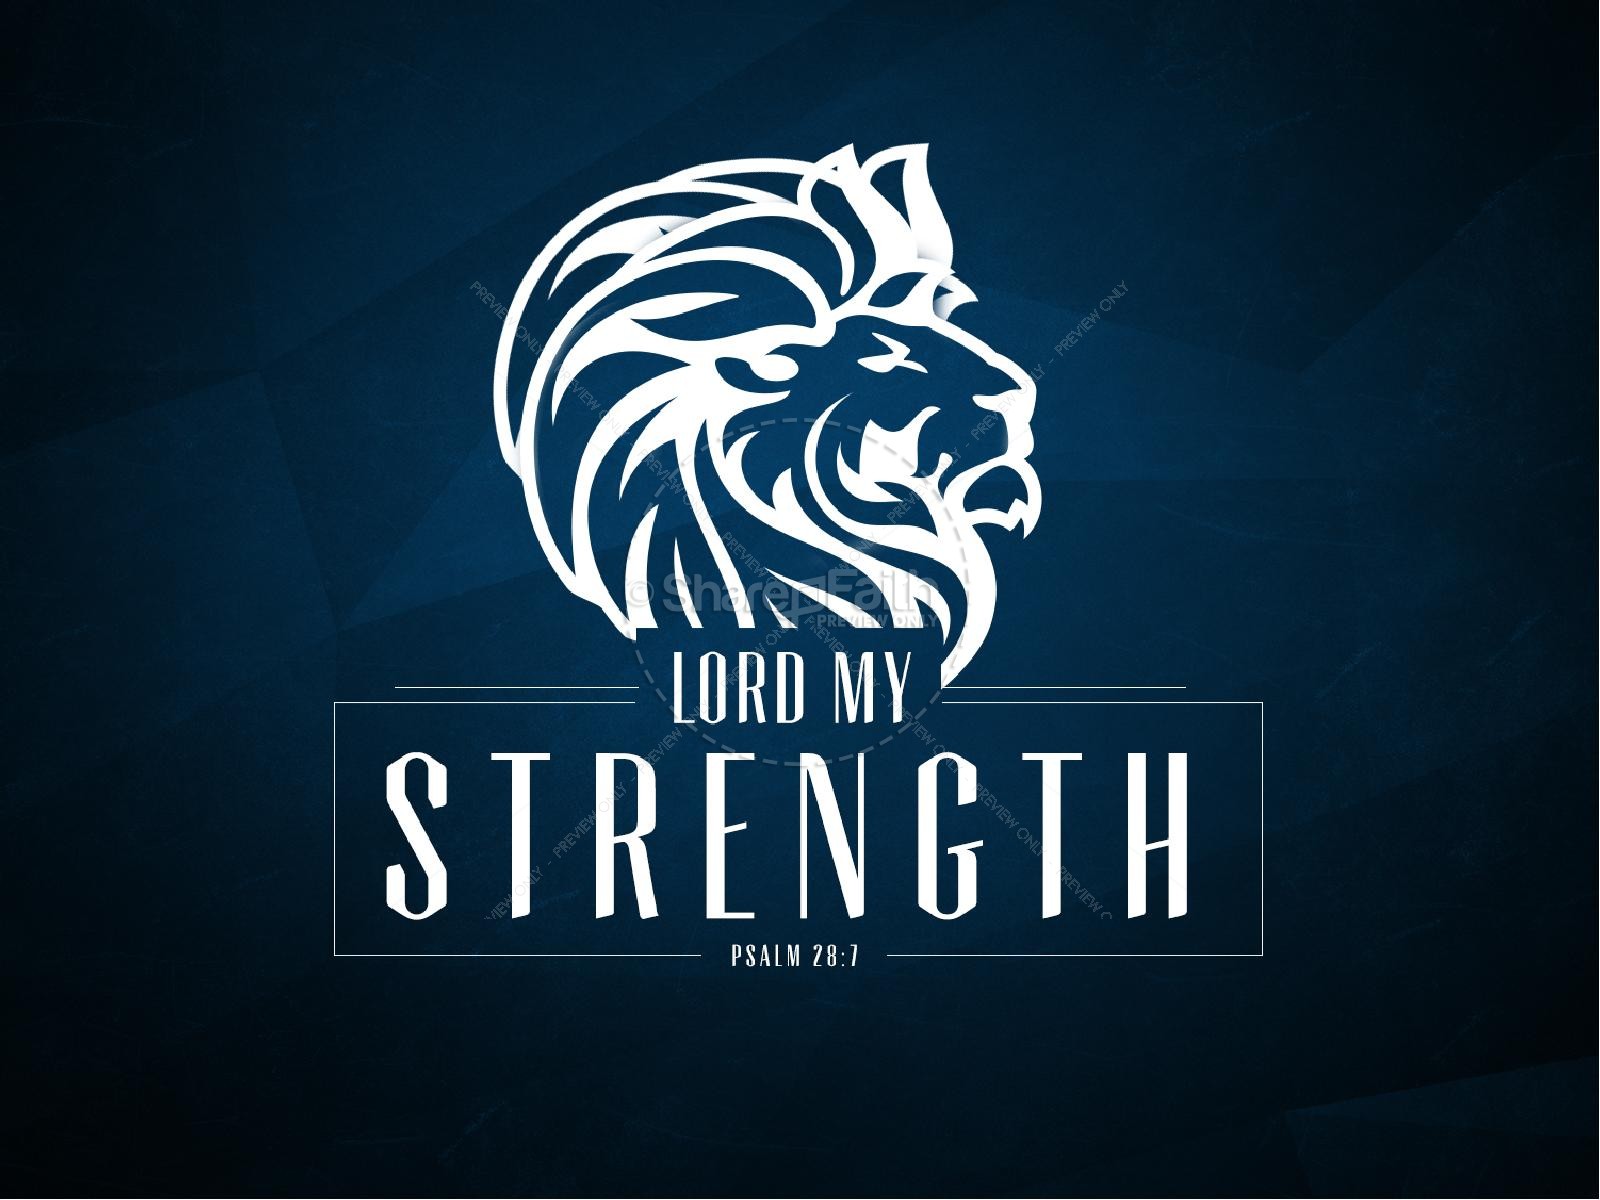 Lord my Strength Christian PowerPoint Thumbnail 1